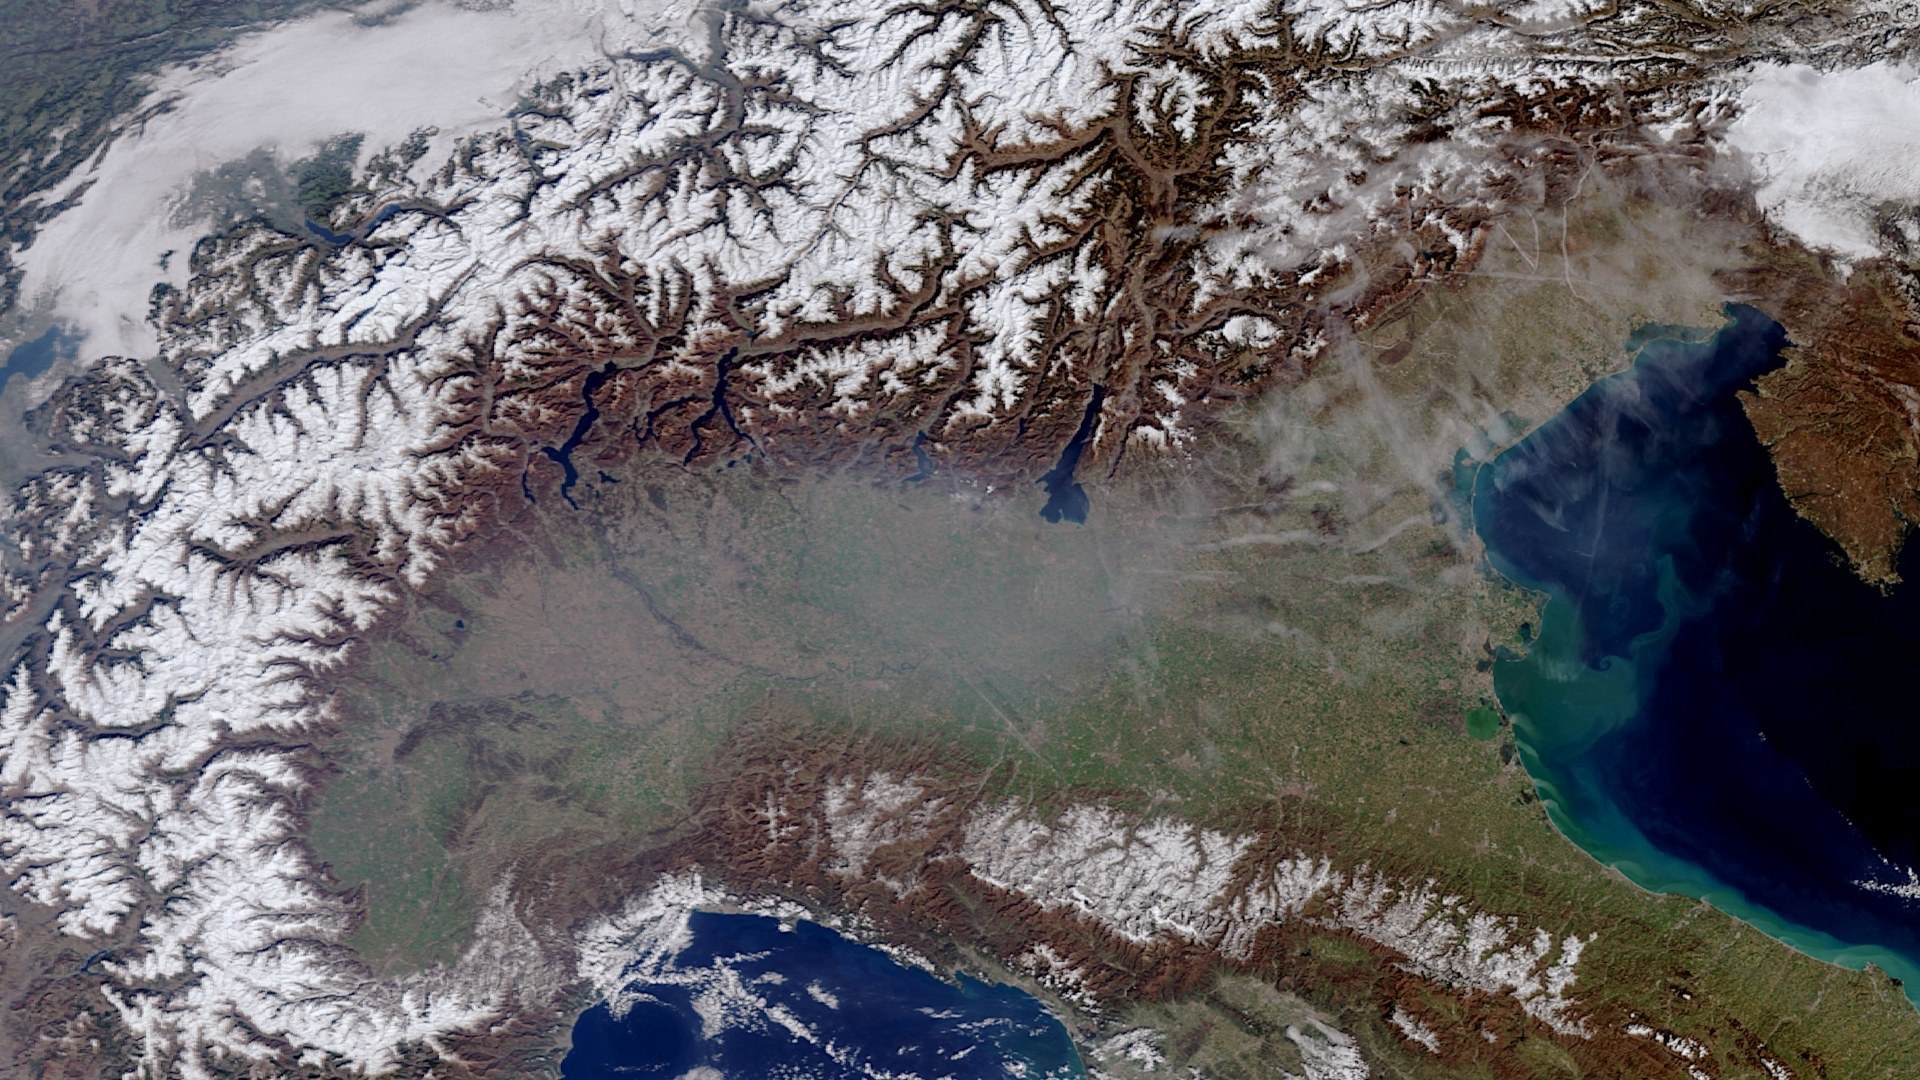 Snow cover in the Western Alps reaches the lowest levels ever recorded in some areas in spring 2023